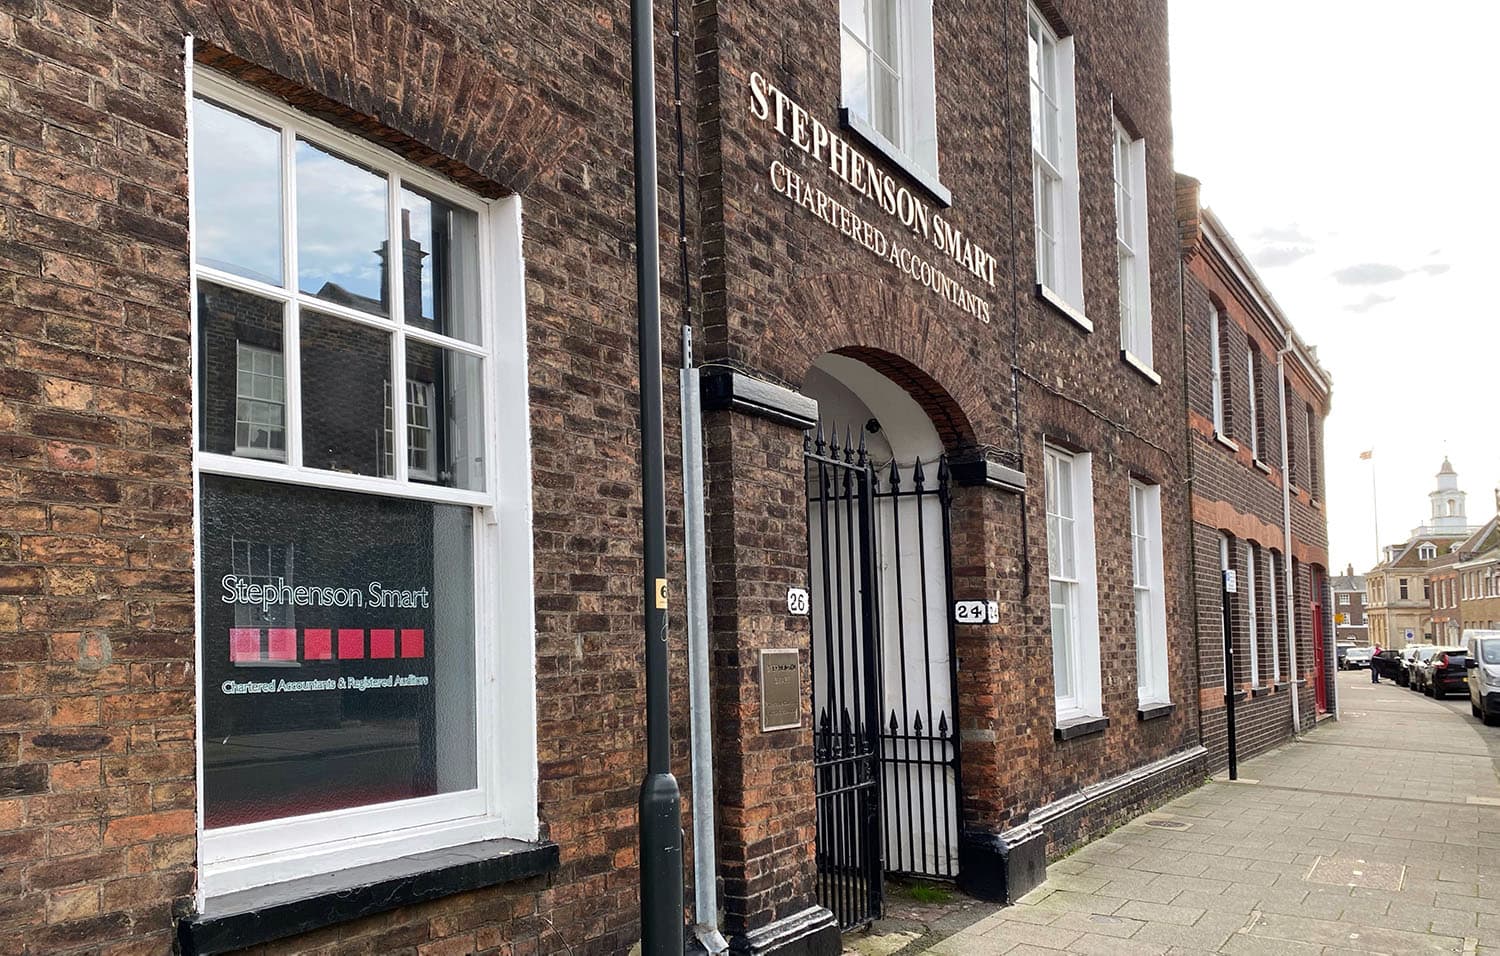 The front of the King's Lynn office of Stephenson Smart accountants.